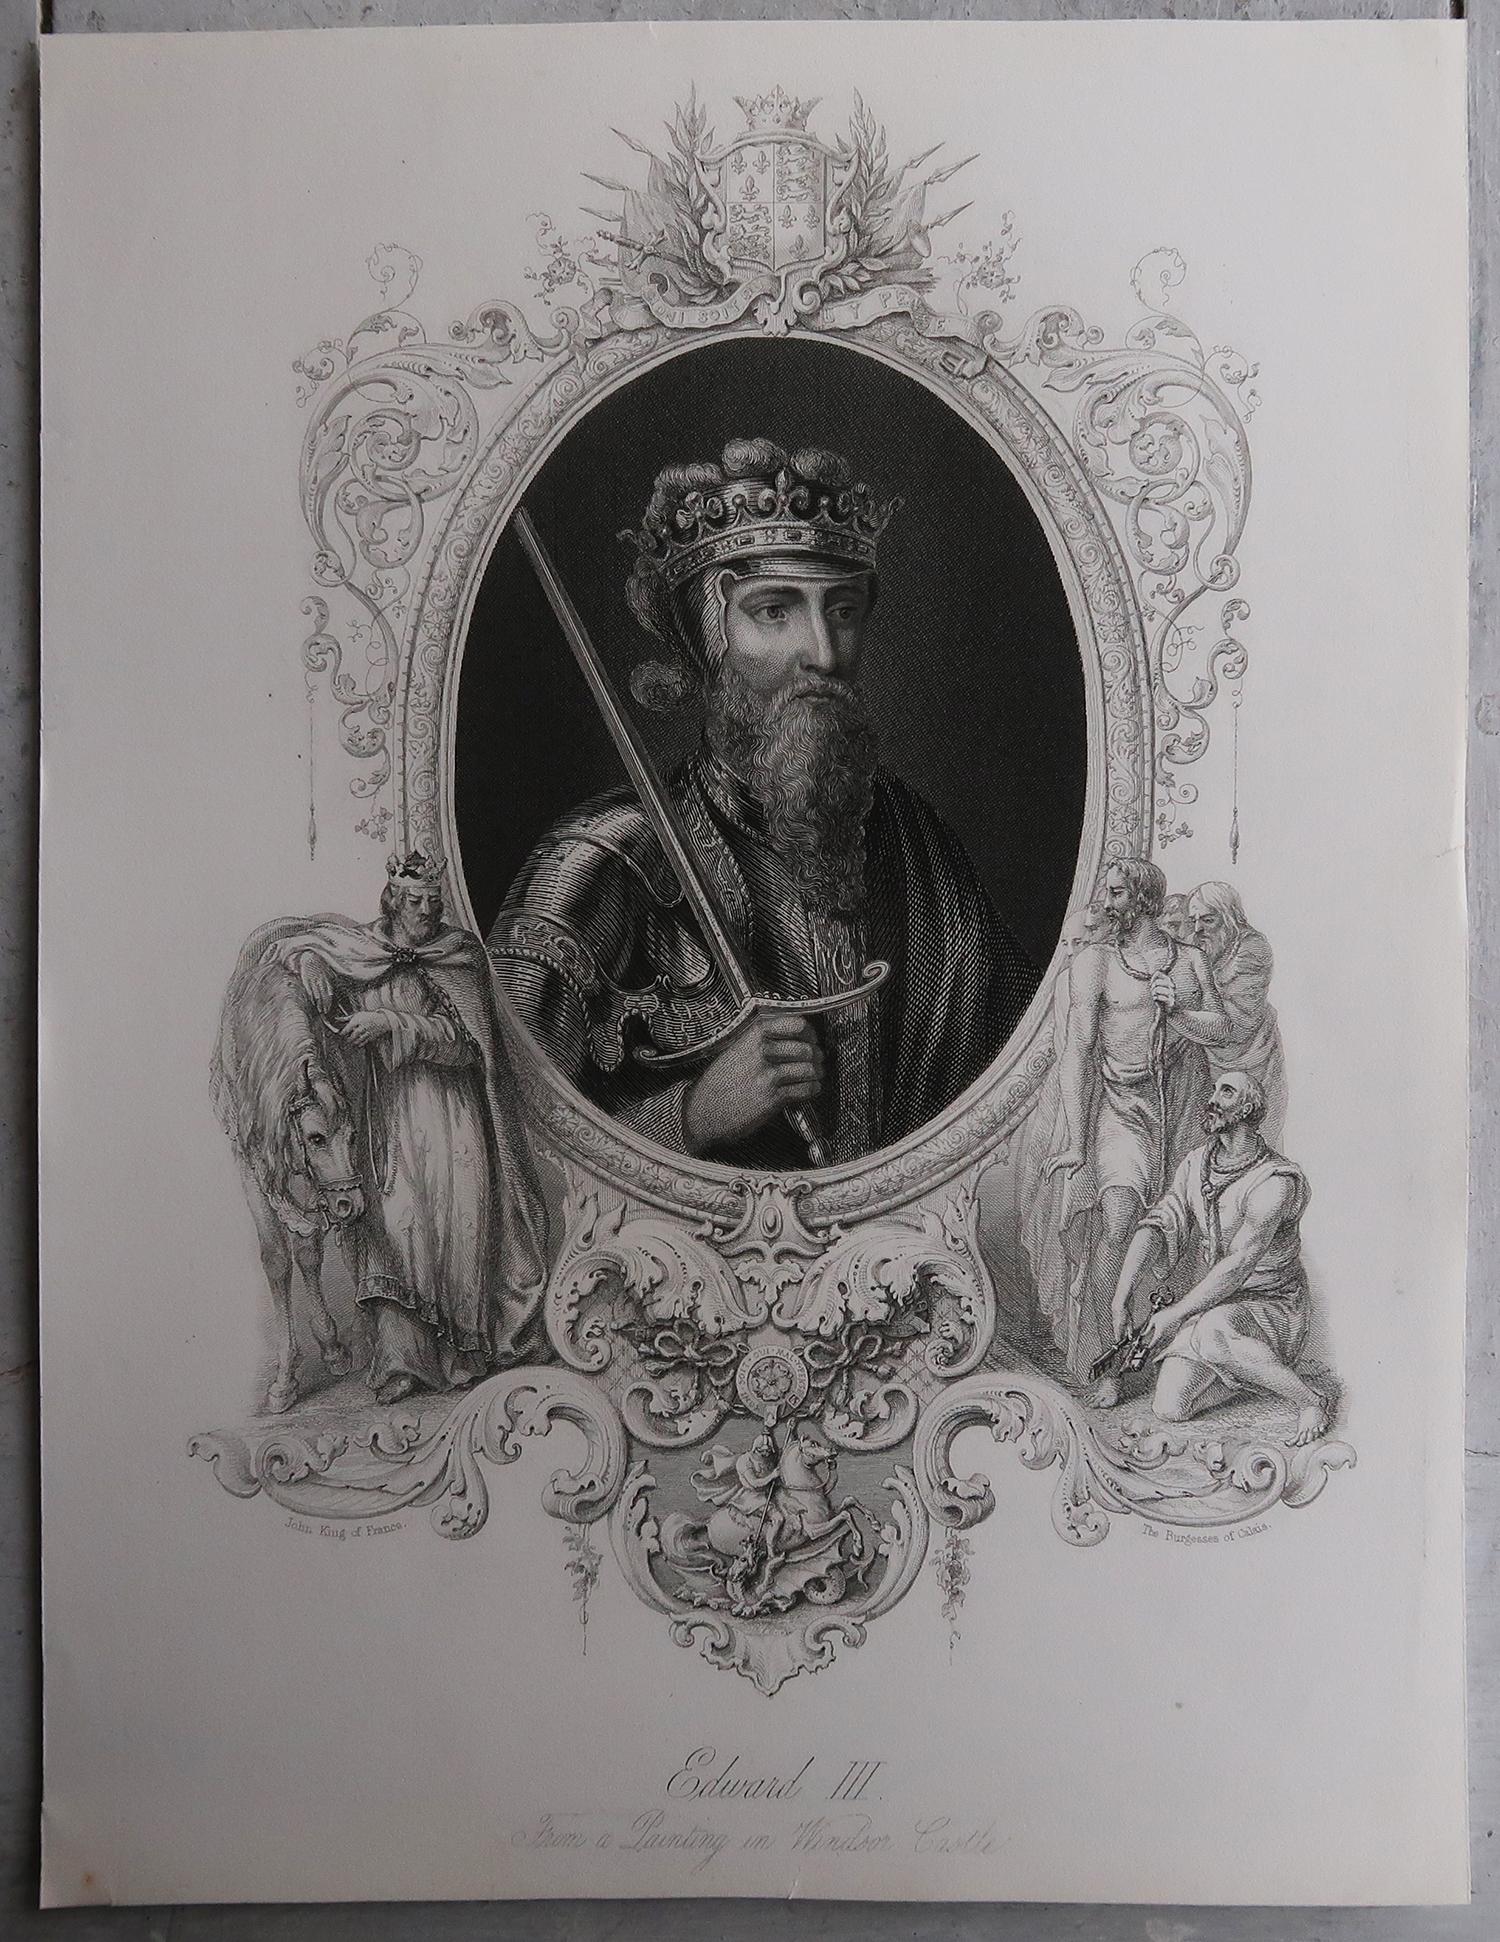 Glorious set of 15 prints of UK monarchs

Steel engravings with amazing decorative vignettes

Published C.1840

Unframed.

The measurement given is the paper size of one print.

Free shipping.





